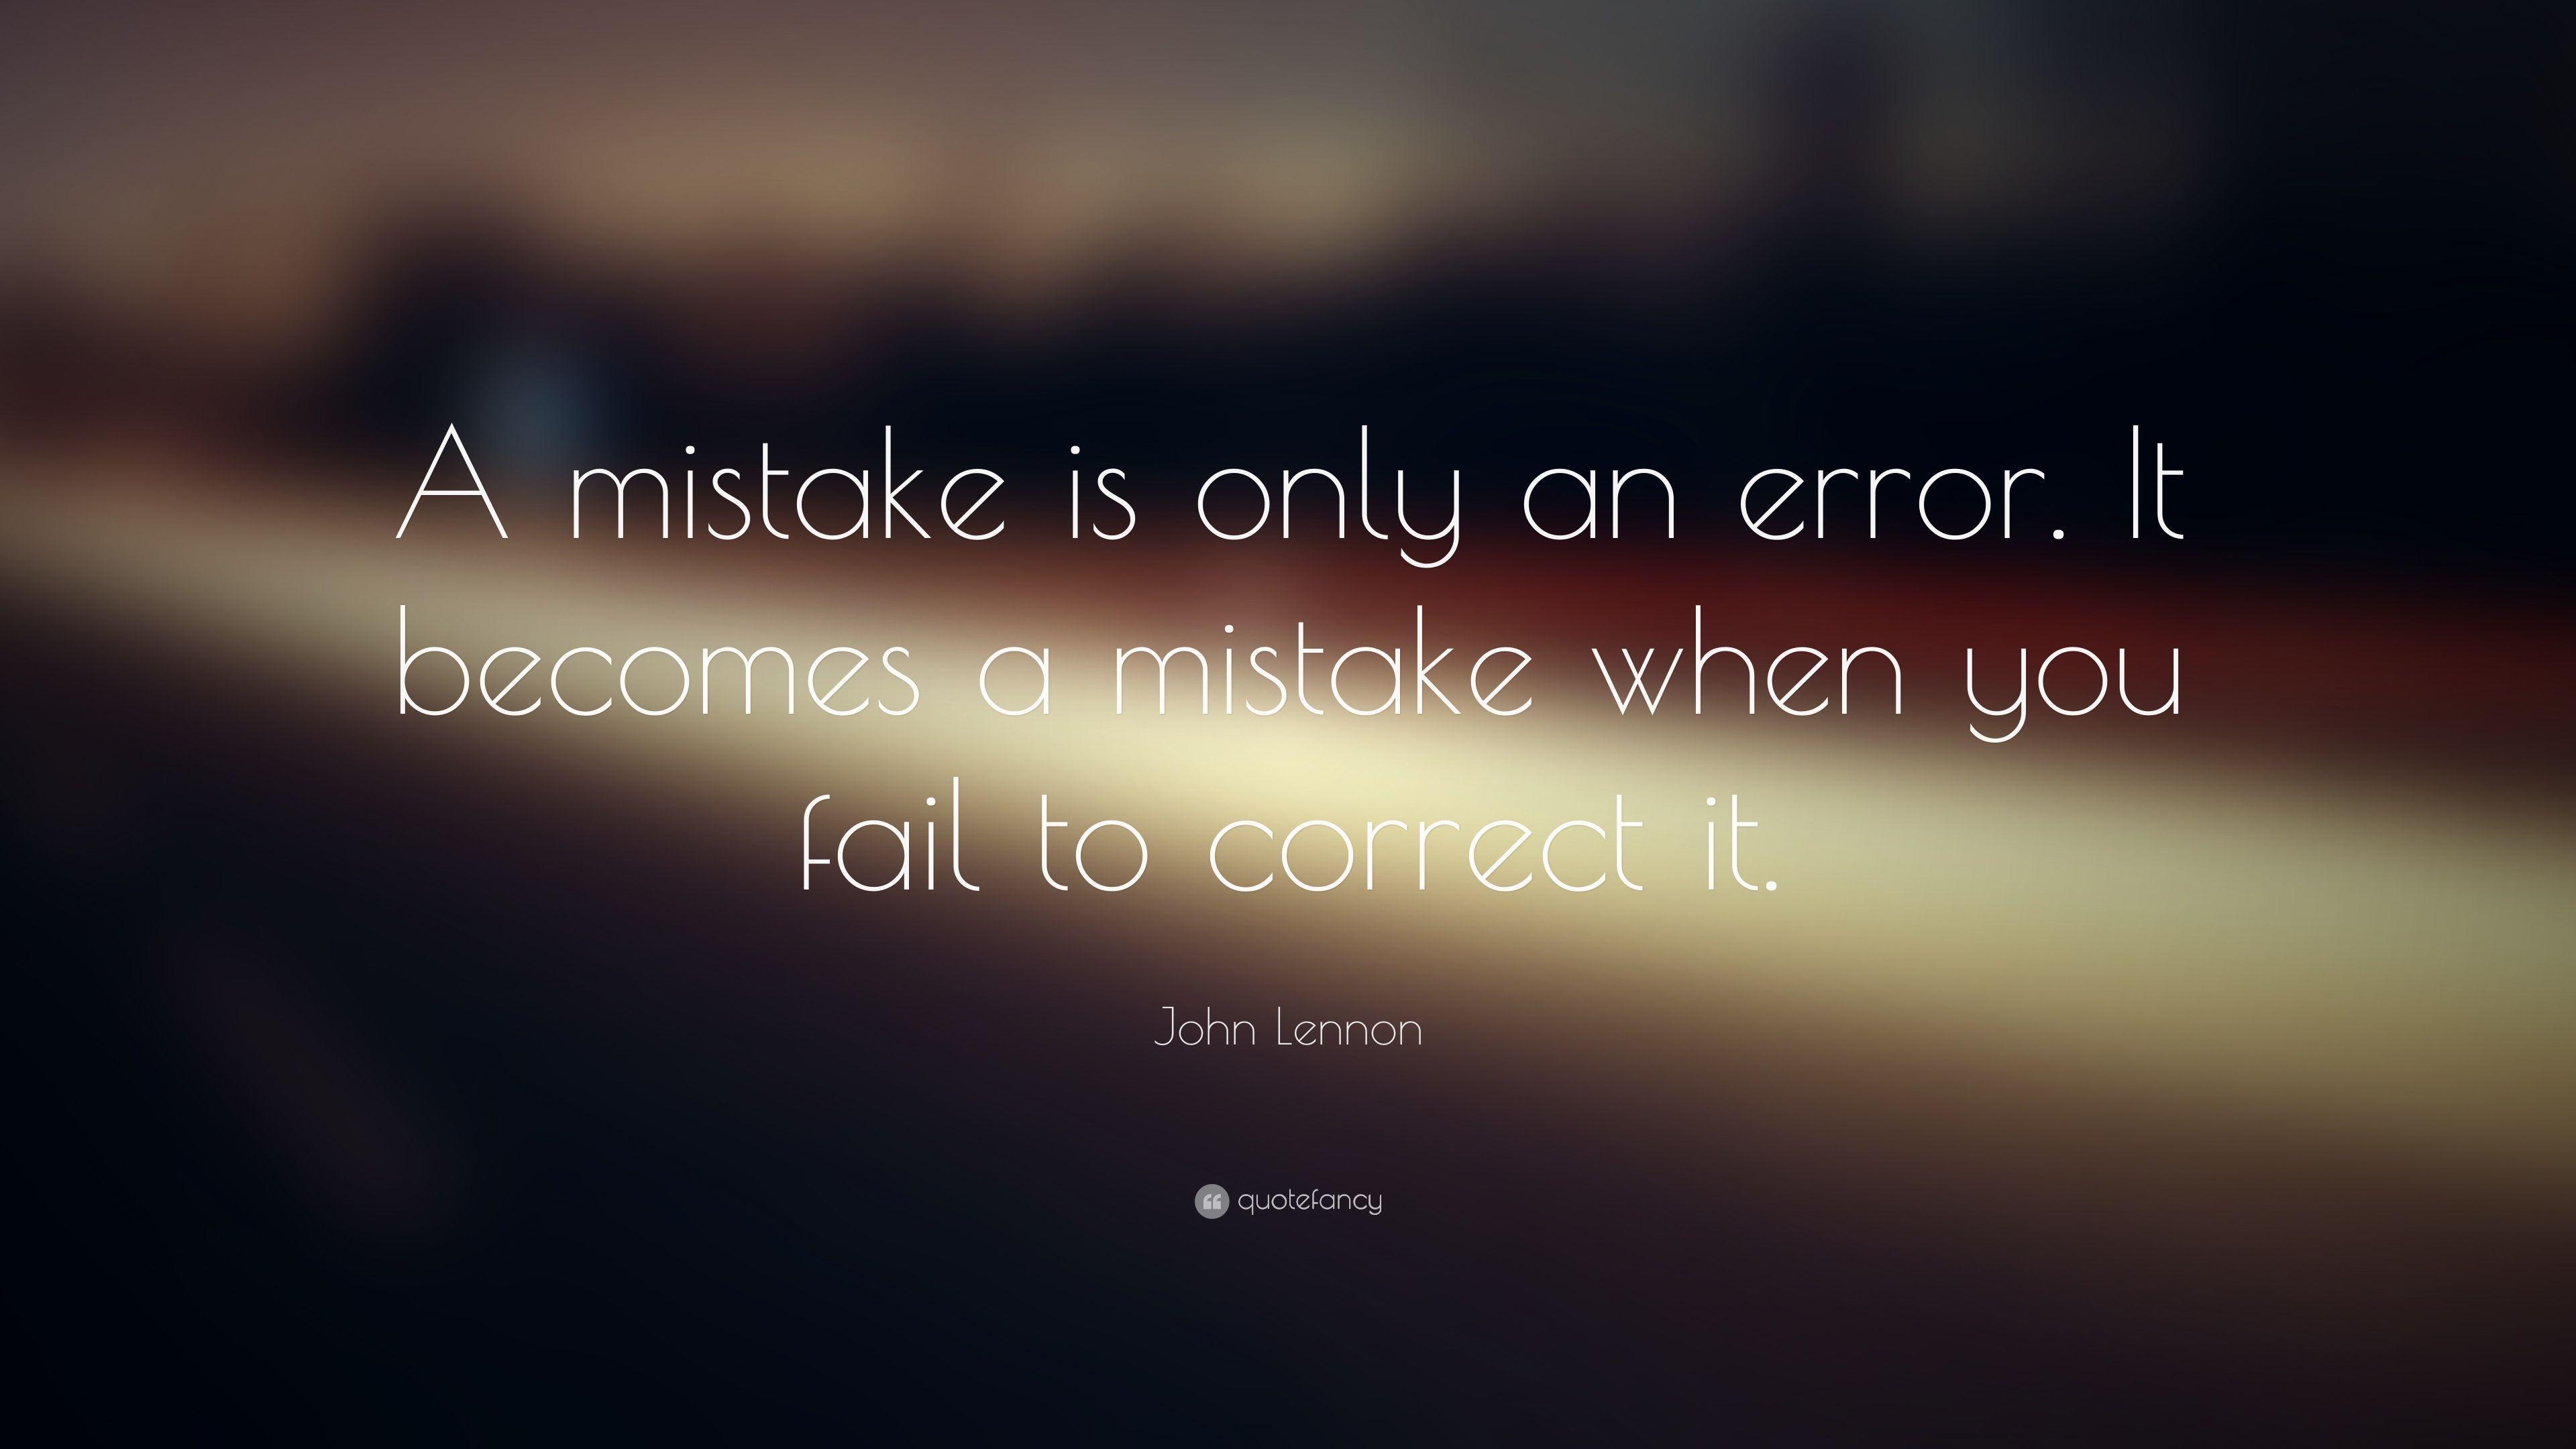 John Lennon Quote: “A mistake is only an error. It becomes a